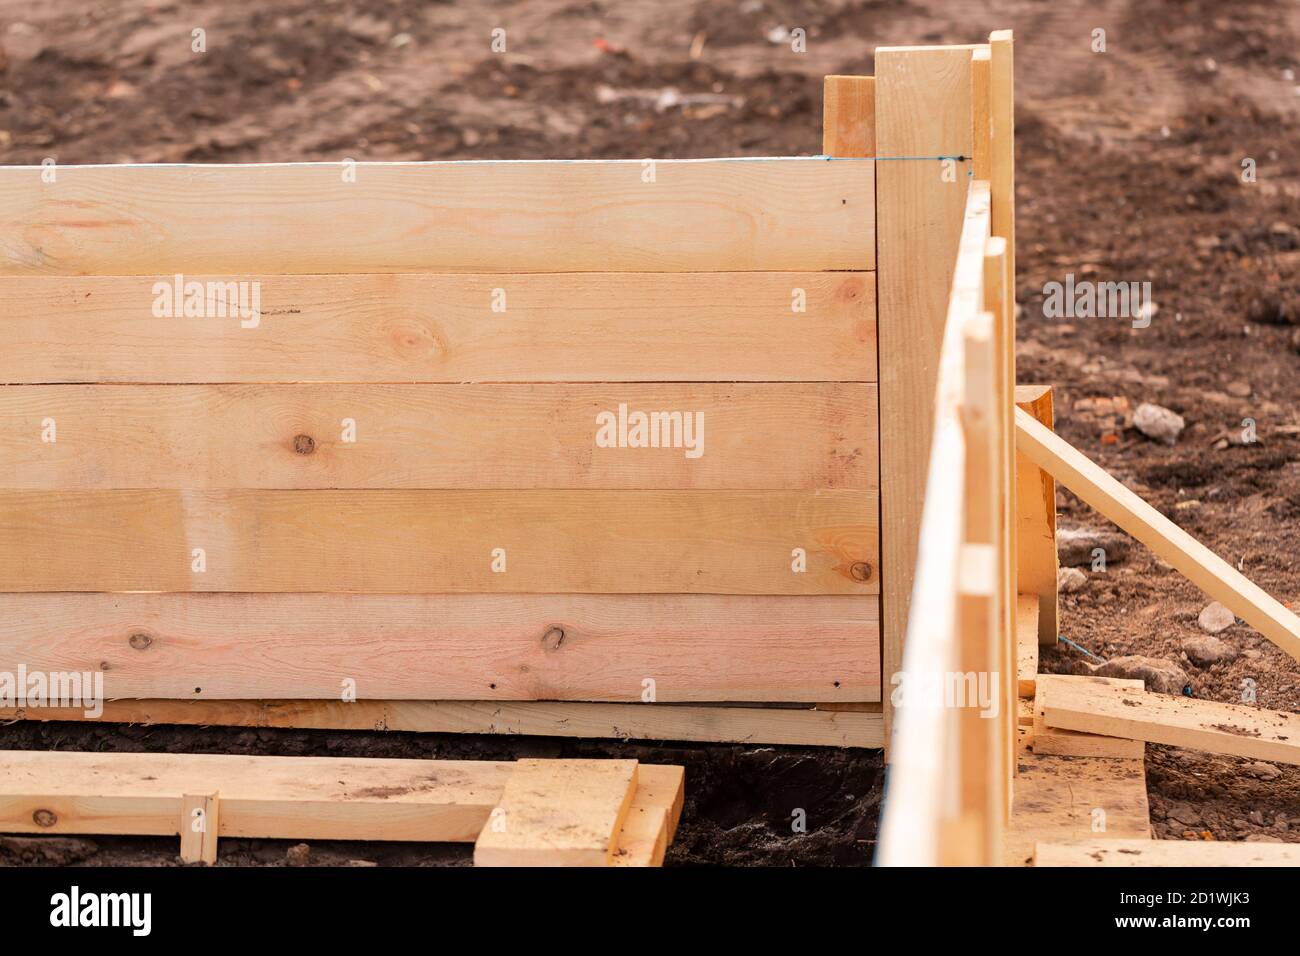 Wooden formwork for creating strip foundation for new house basis. Constructing house from the beginning concept Stock Photo